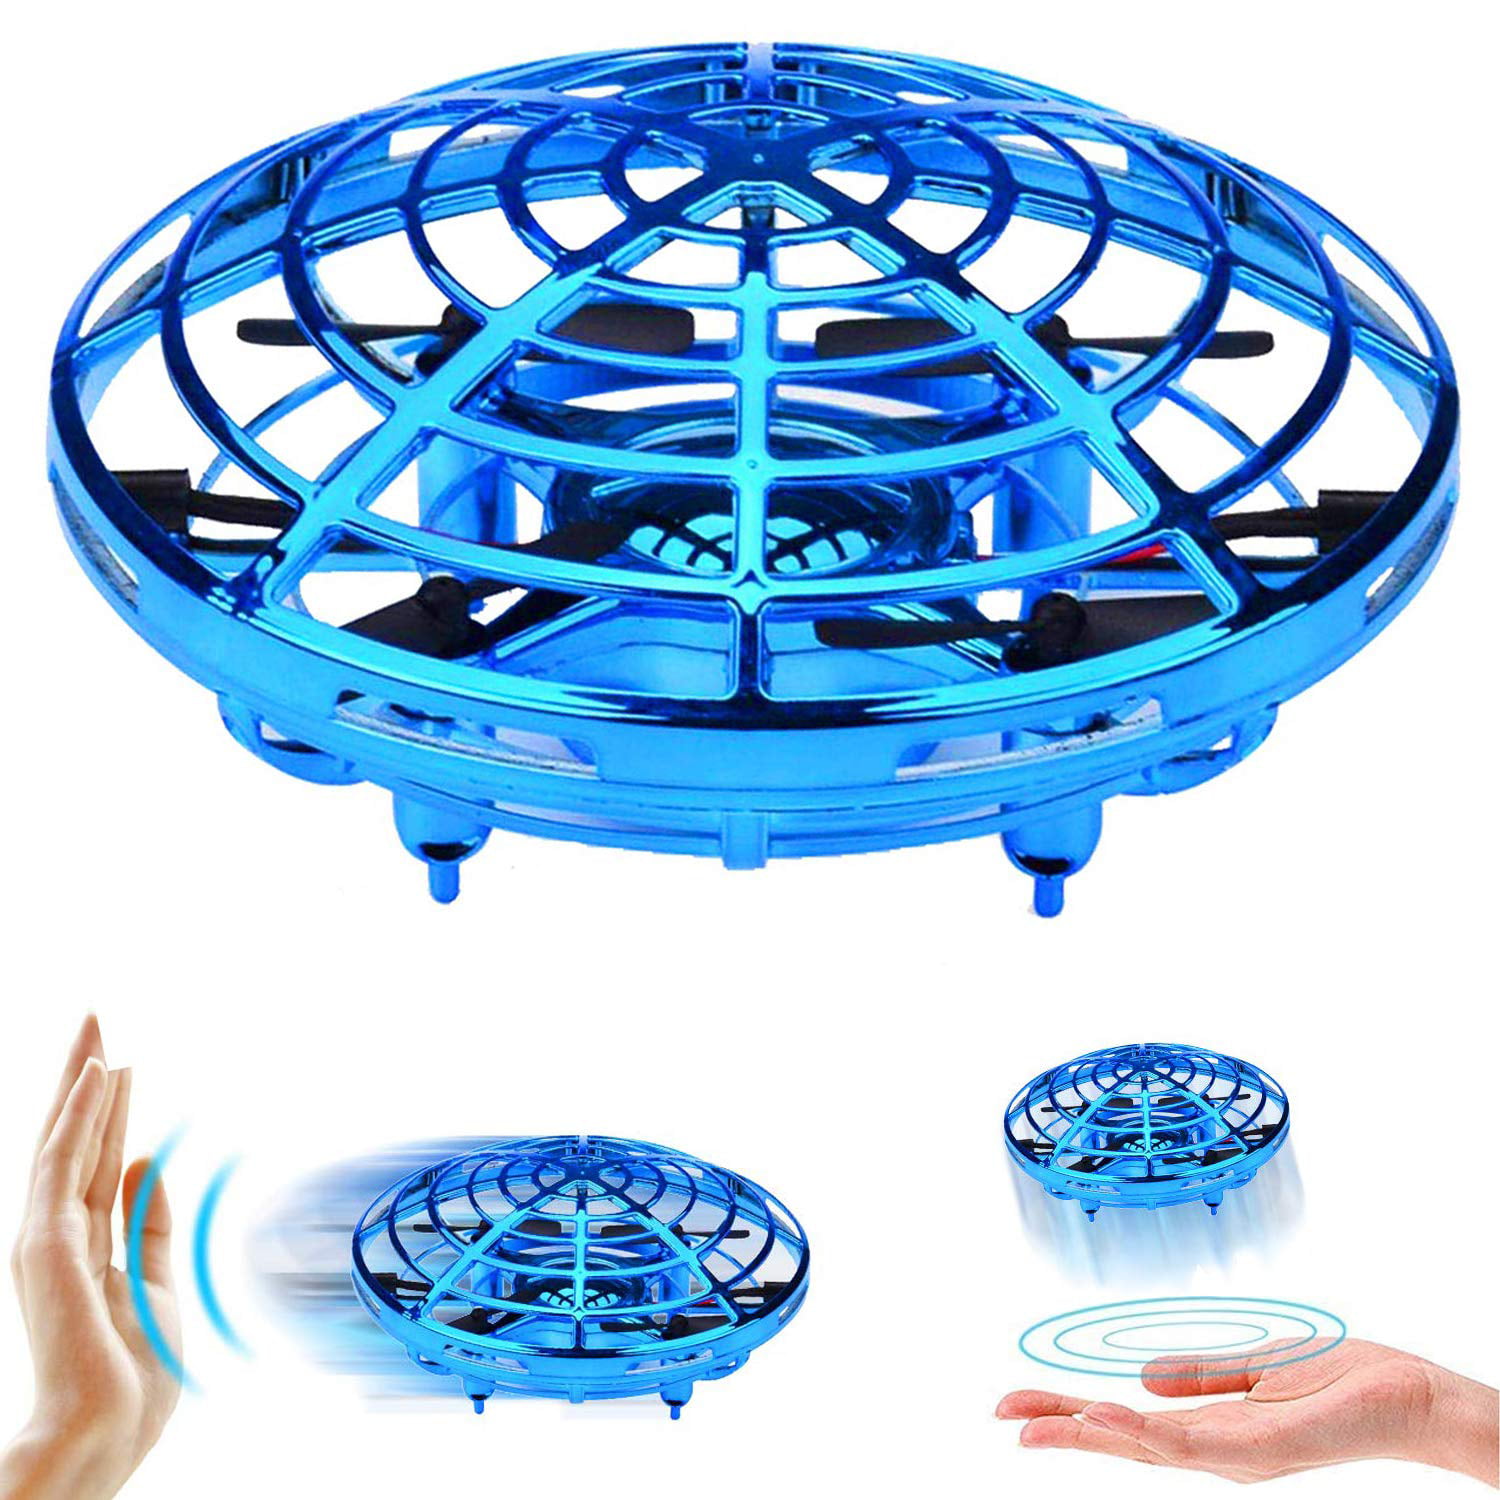 Flying Drone Kids RC Hand Motion Mini Smart Control Flying UFO Ball Aircraft Toy